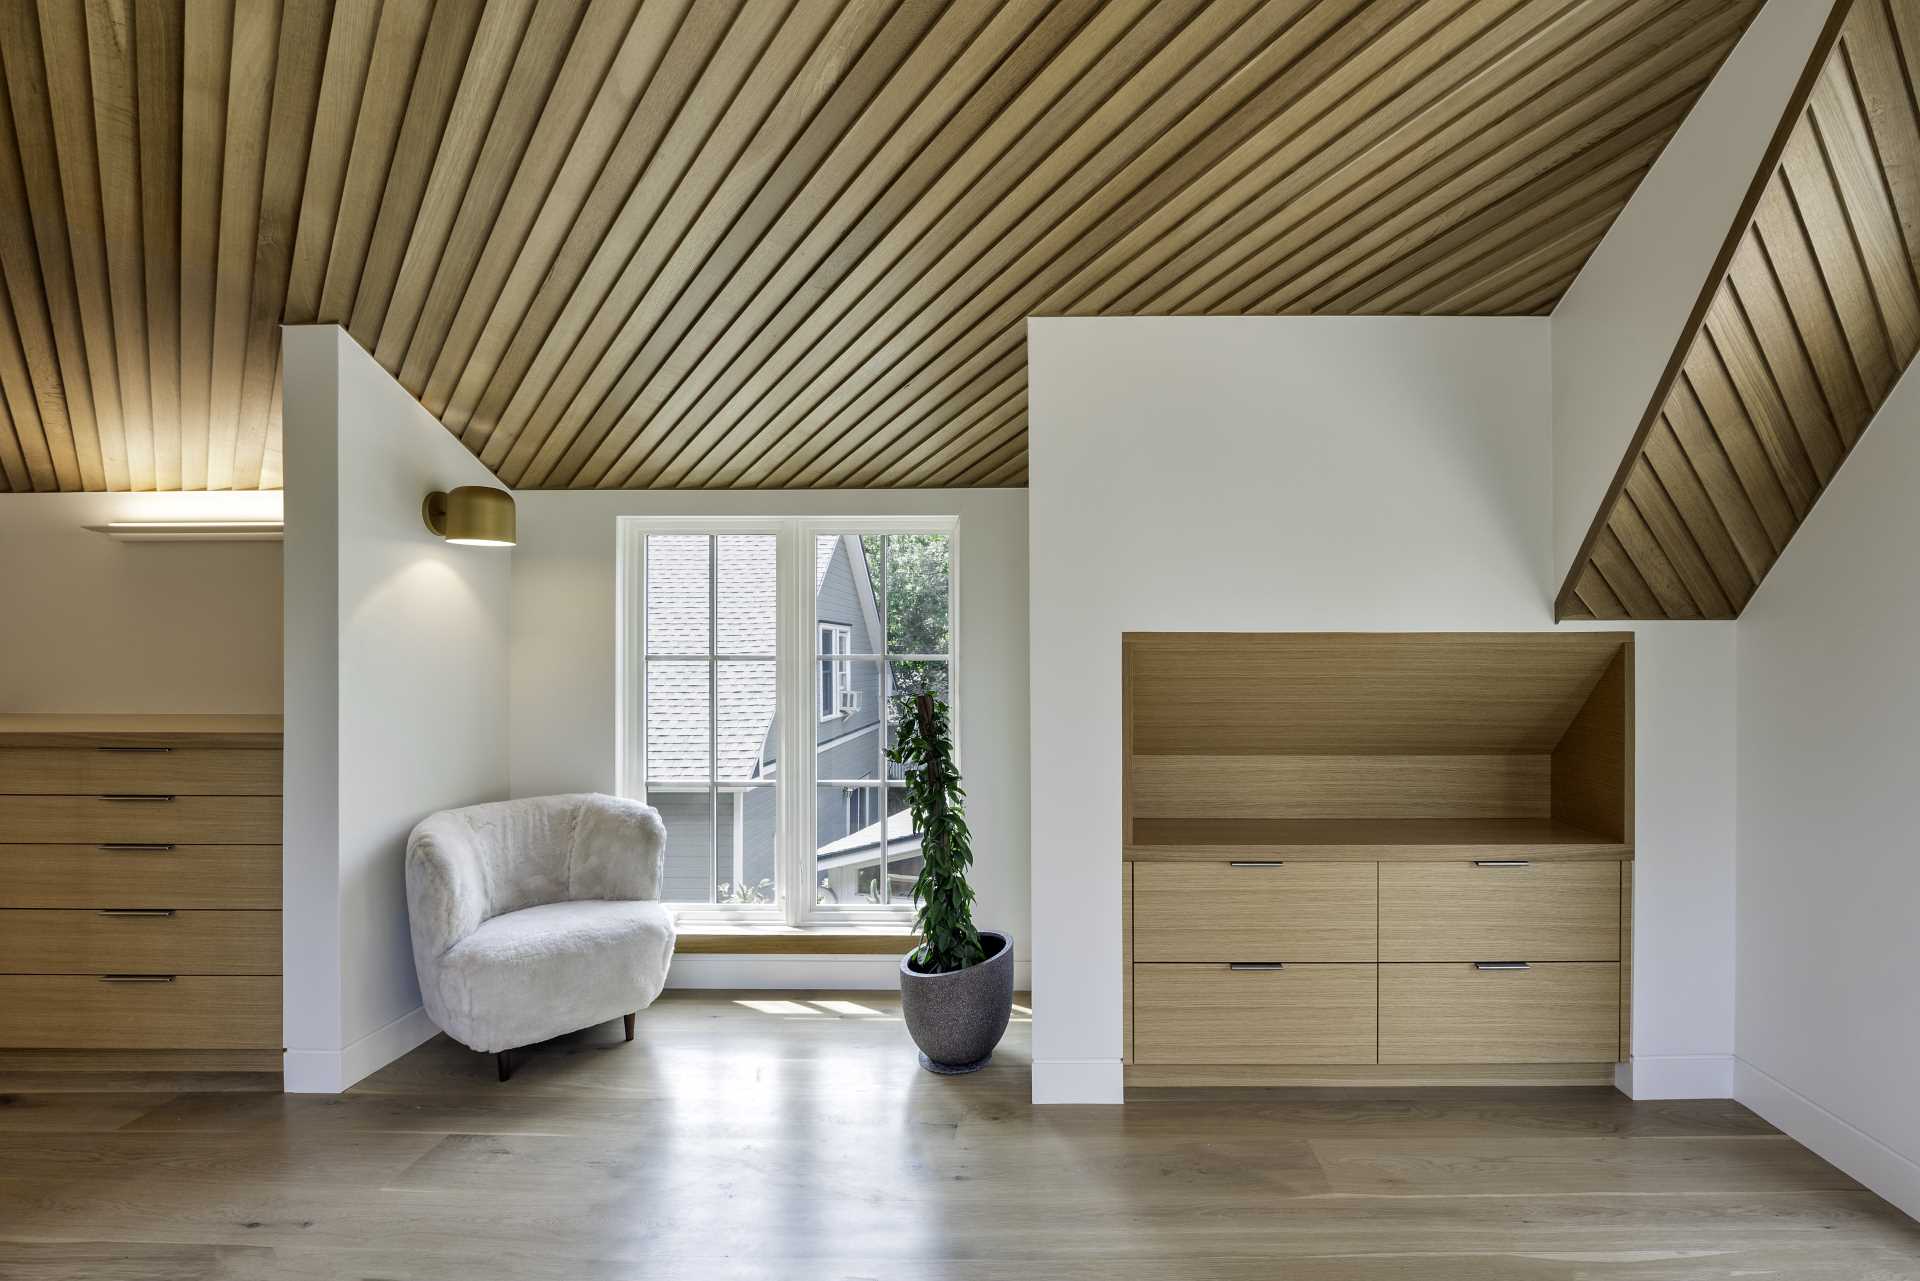 In this main bedroom, the ceiling is composed of lap siding installed at an angle, aligned perfectly at the ridge, while built-in dressers make smart use of the available ،e.